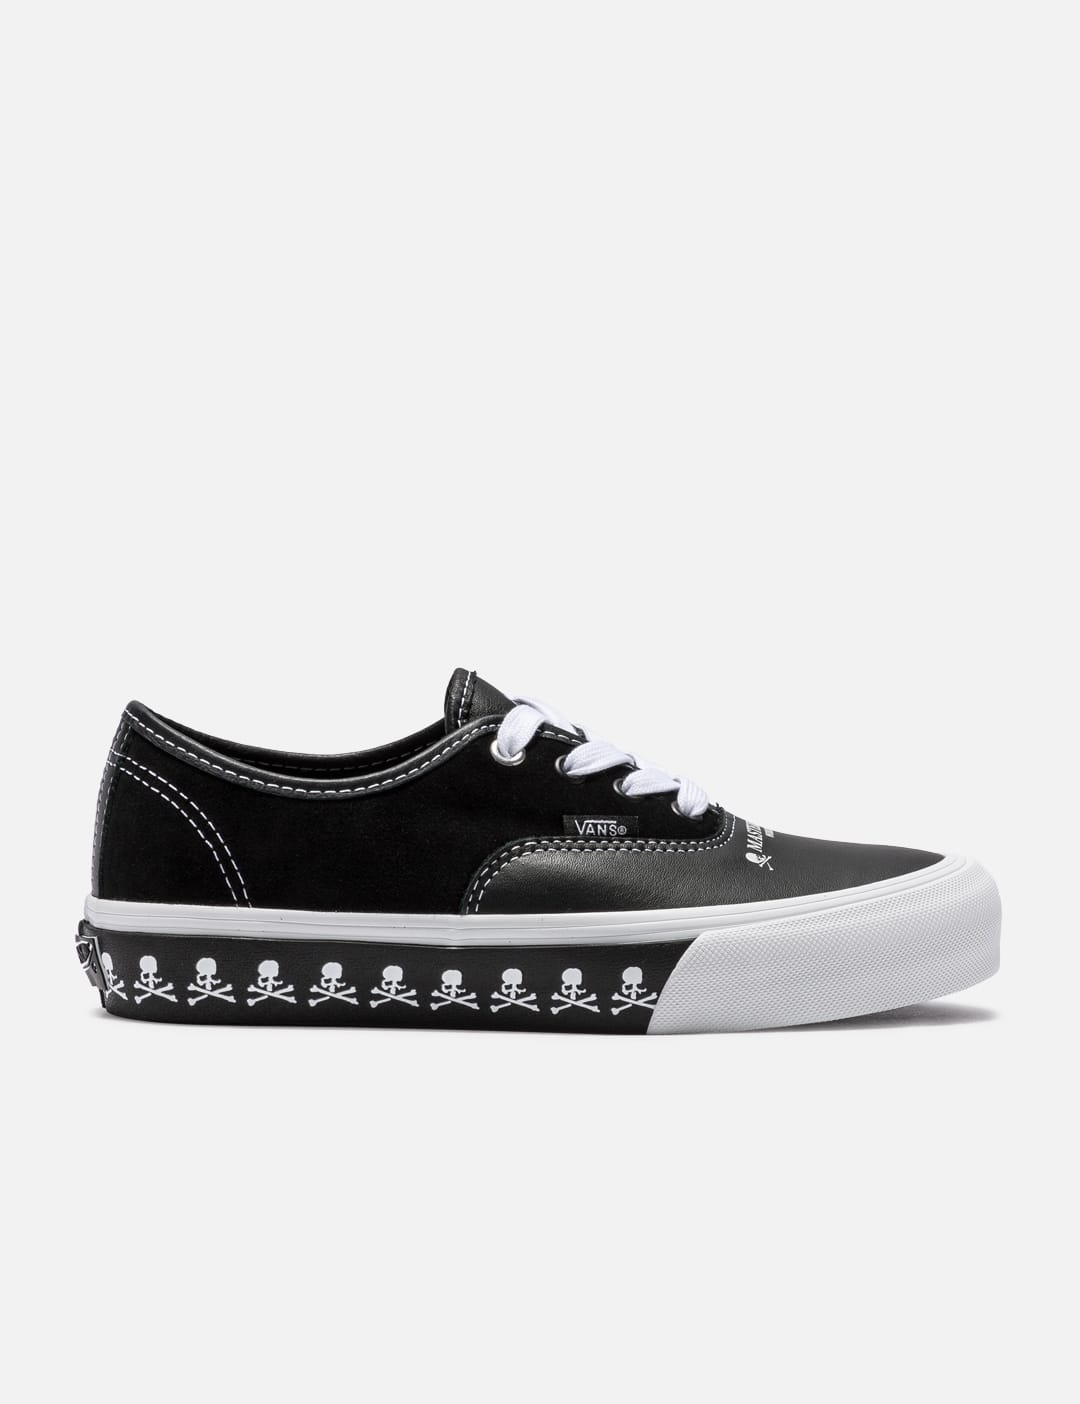 Vans - Vans Vault X Mastermind World Authentic VLT | HBX - Globally Curated  Fashion and Lifestyle by Hypebeast